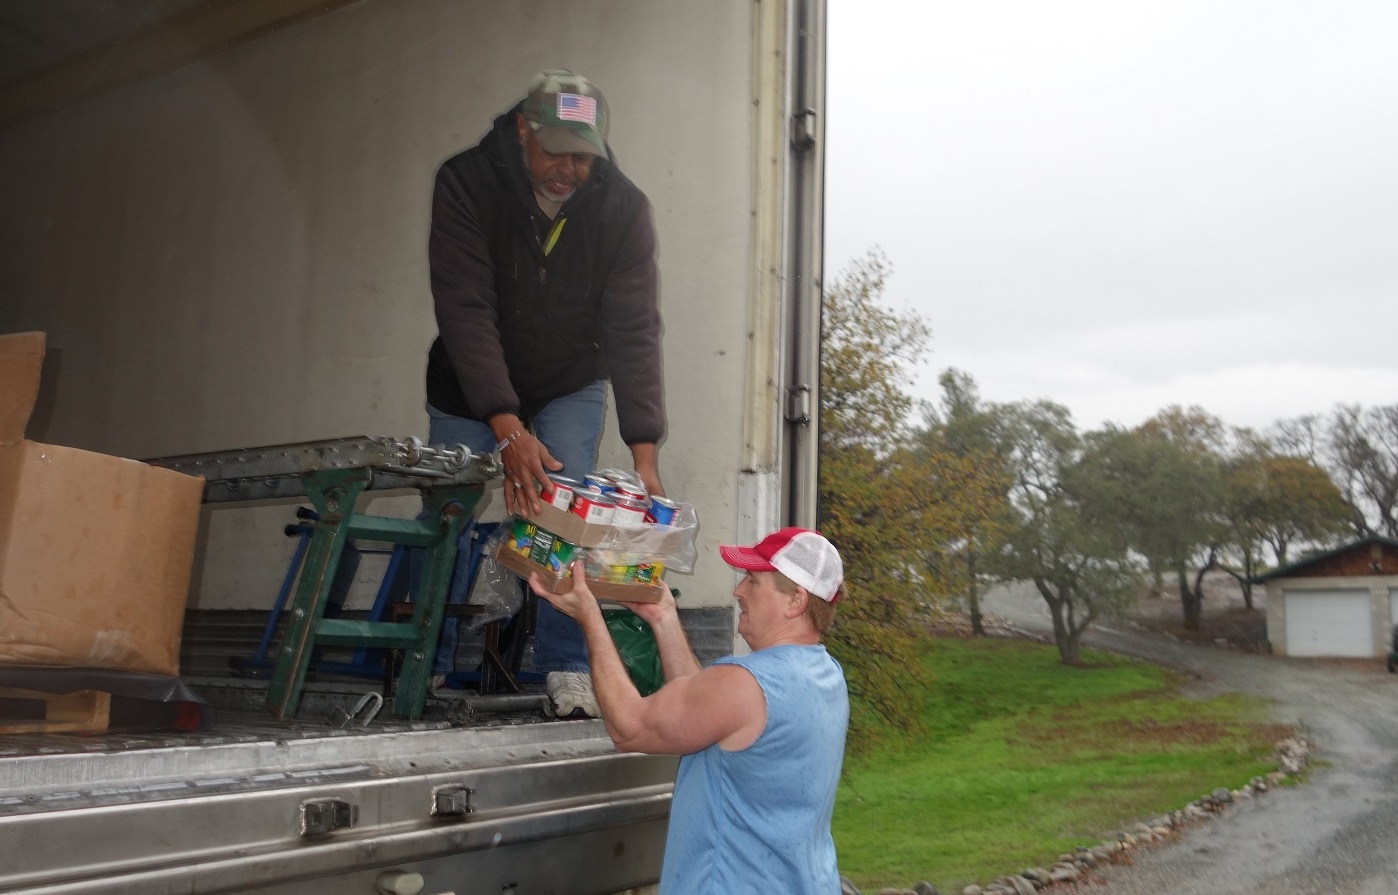 California Valley Miwok Tribe's staff unloading goods during a USDA Food Distribution.